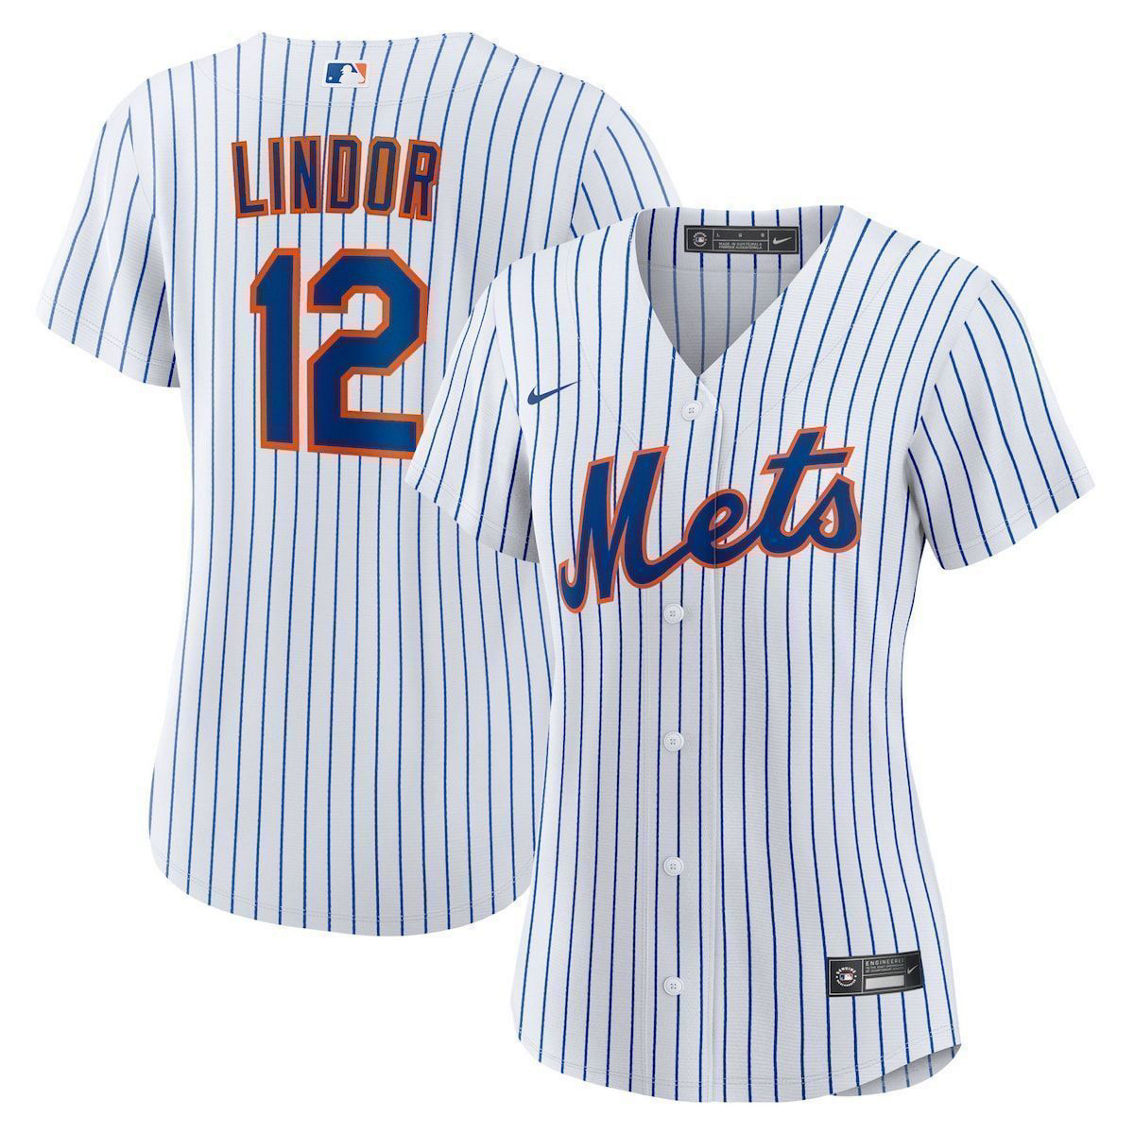 Nike Women's Francisco Lindor White New York Mets Home Replica Player Jersey - Image 2 of 4